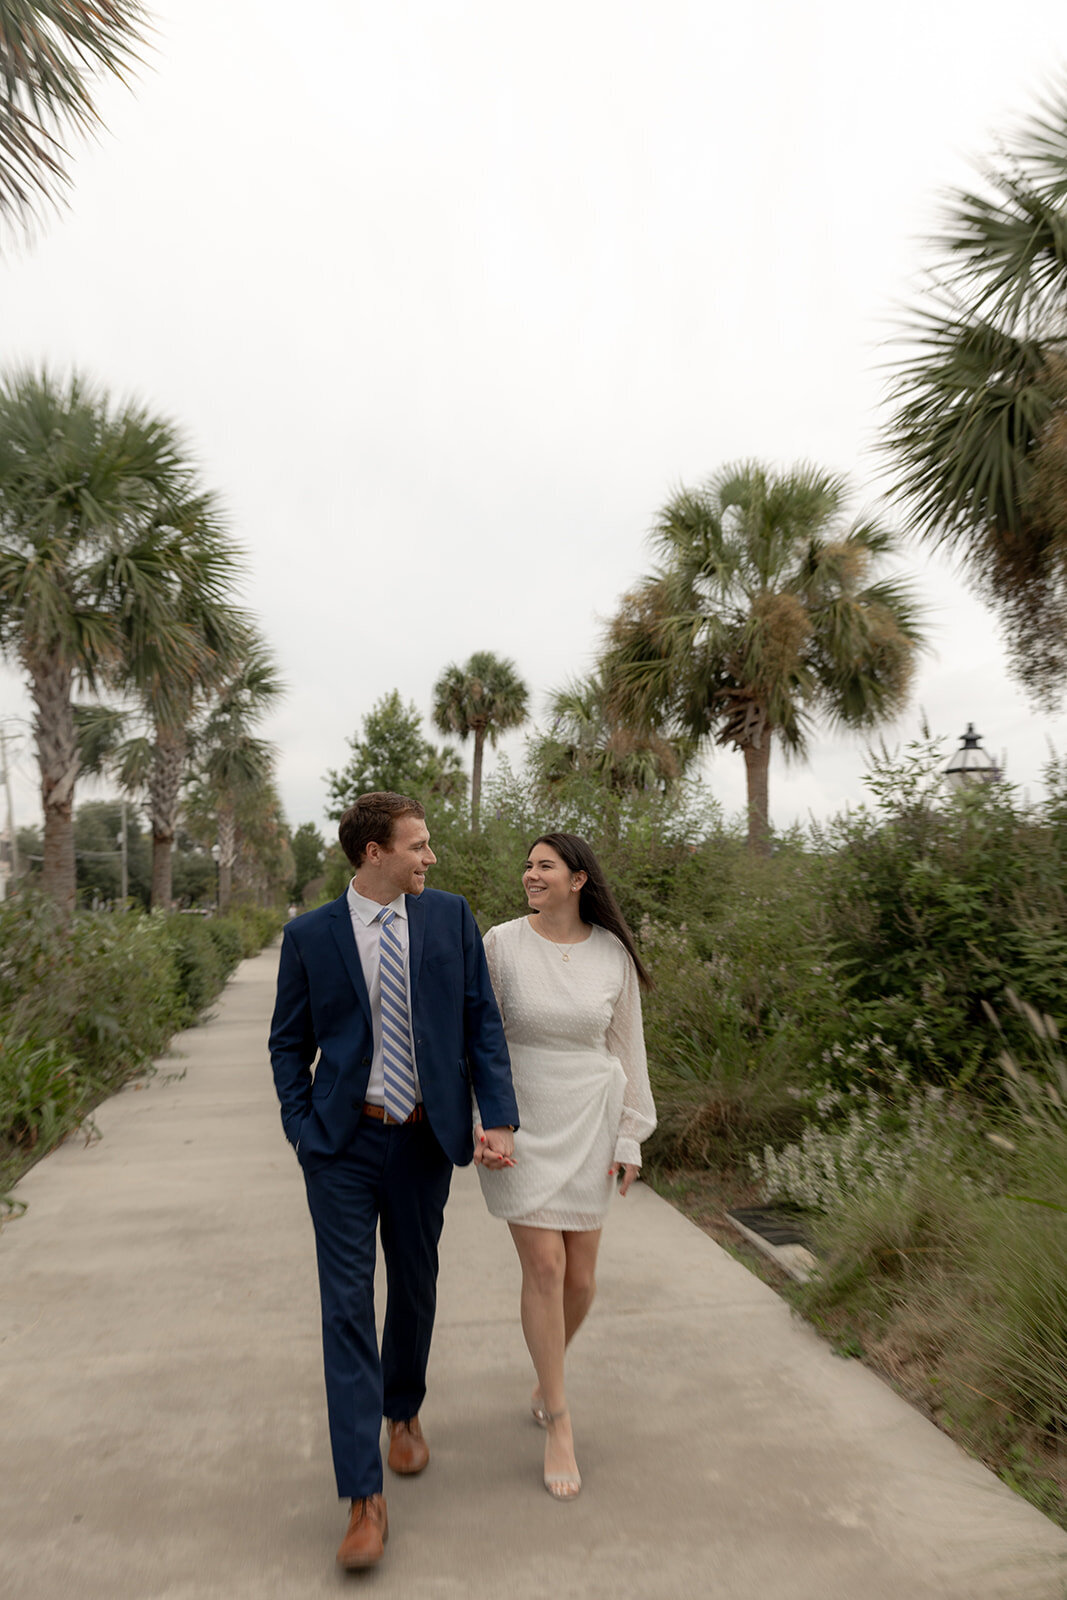 Couple walking on boardwalk at Colonial Lake Park with palms trees and greenery on both sides